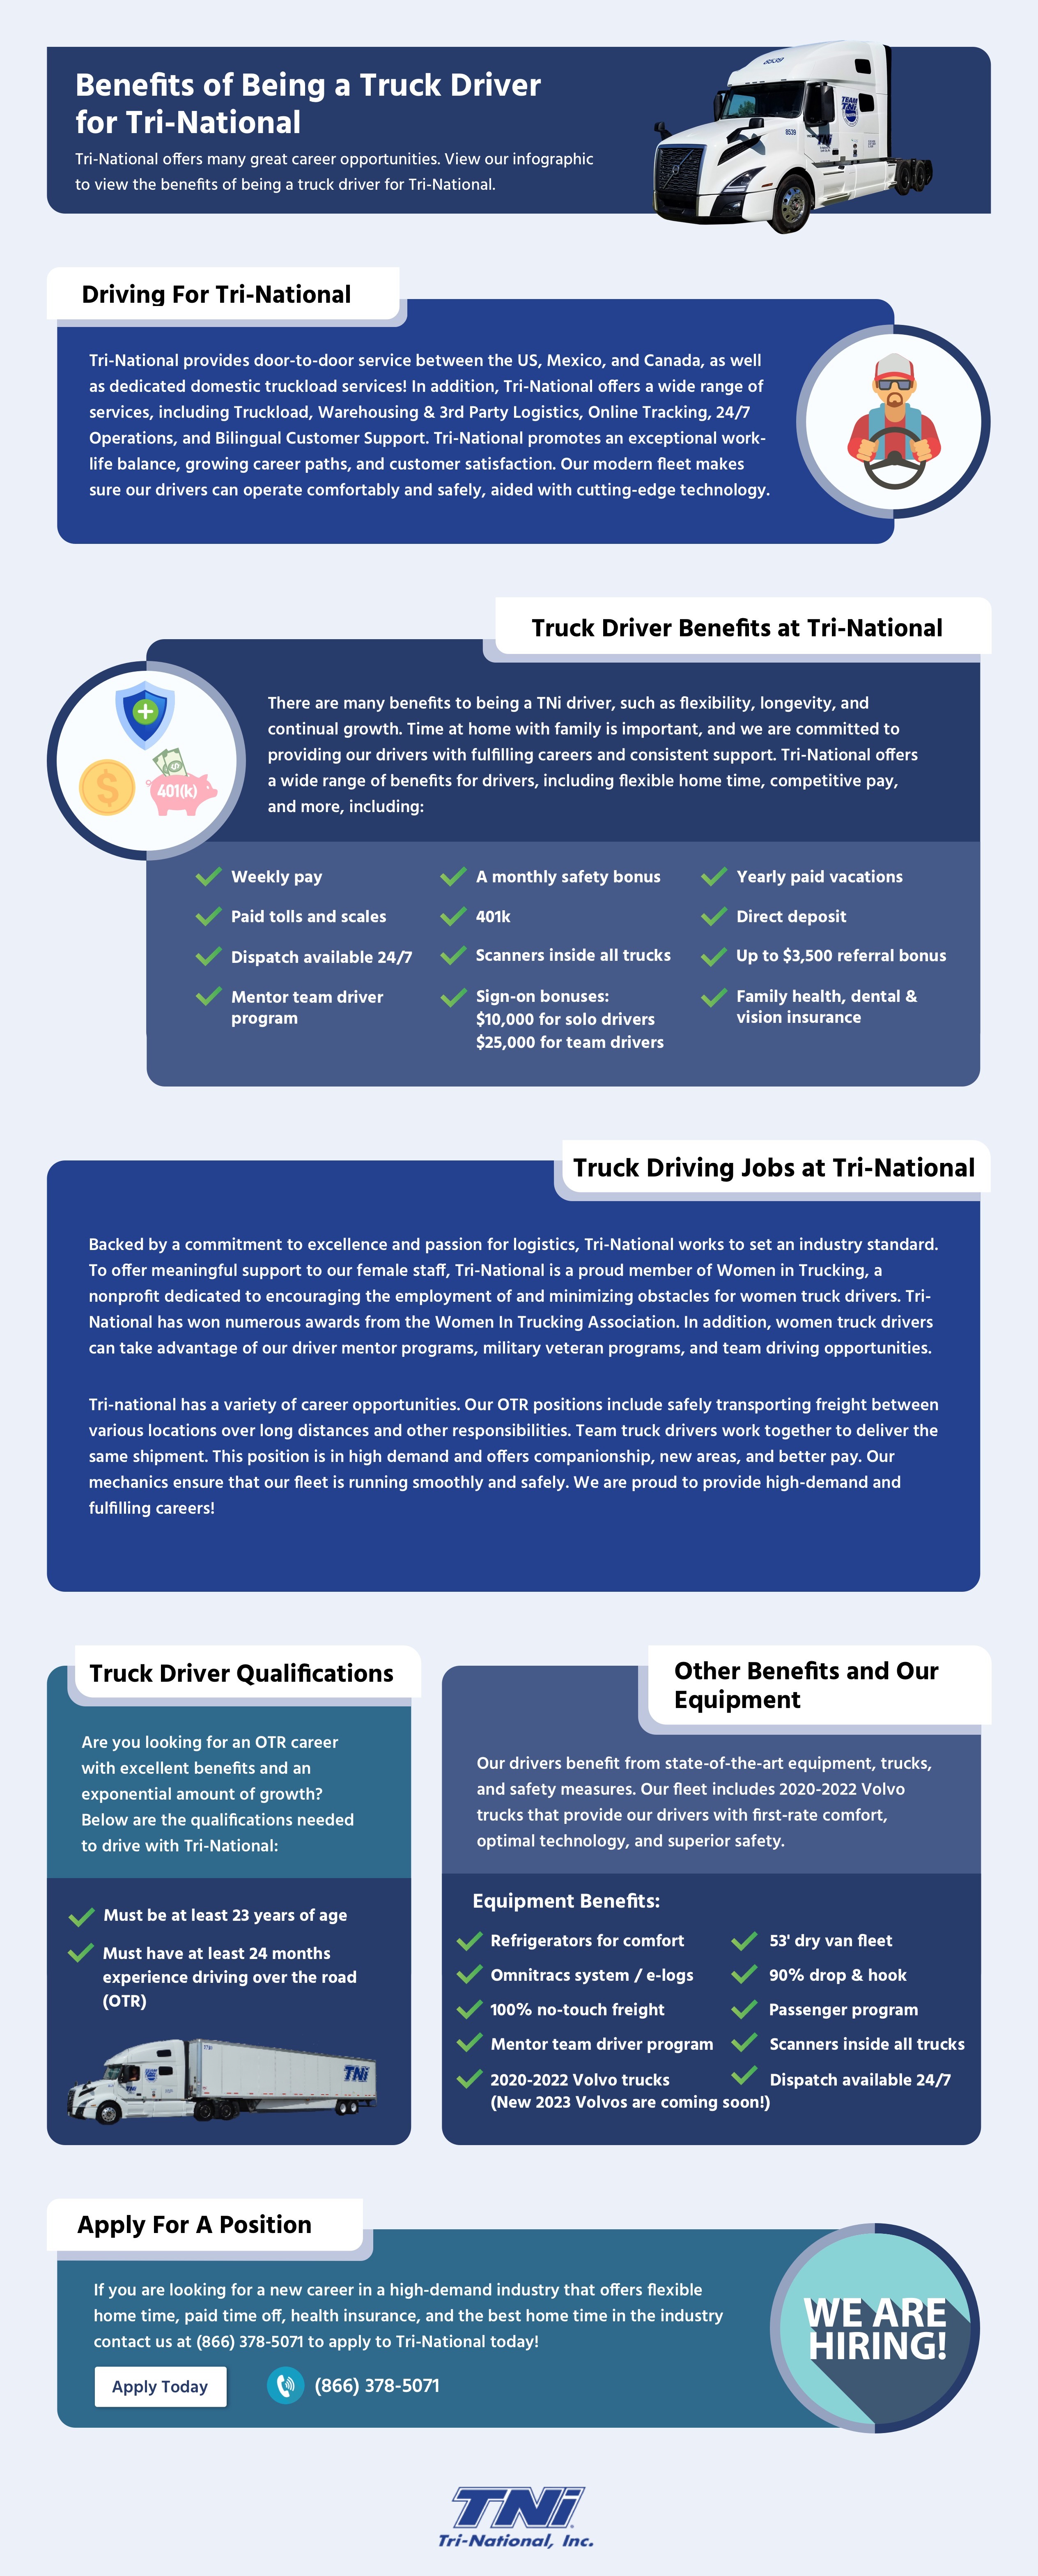 Facts About Truck Driver Fatigue #infographic - Visualistan